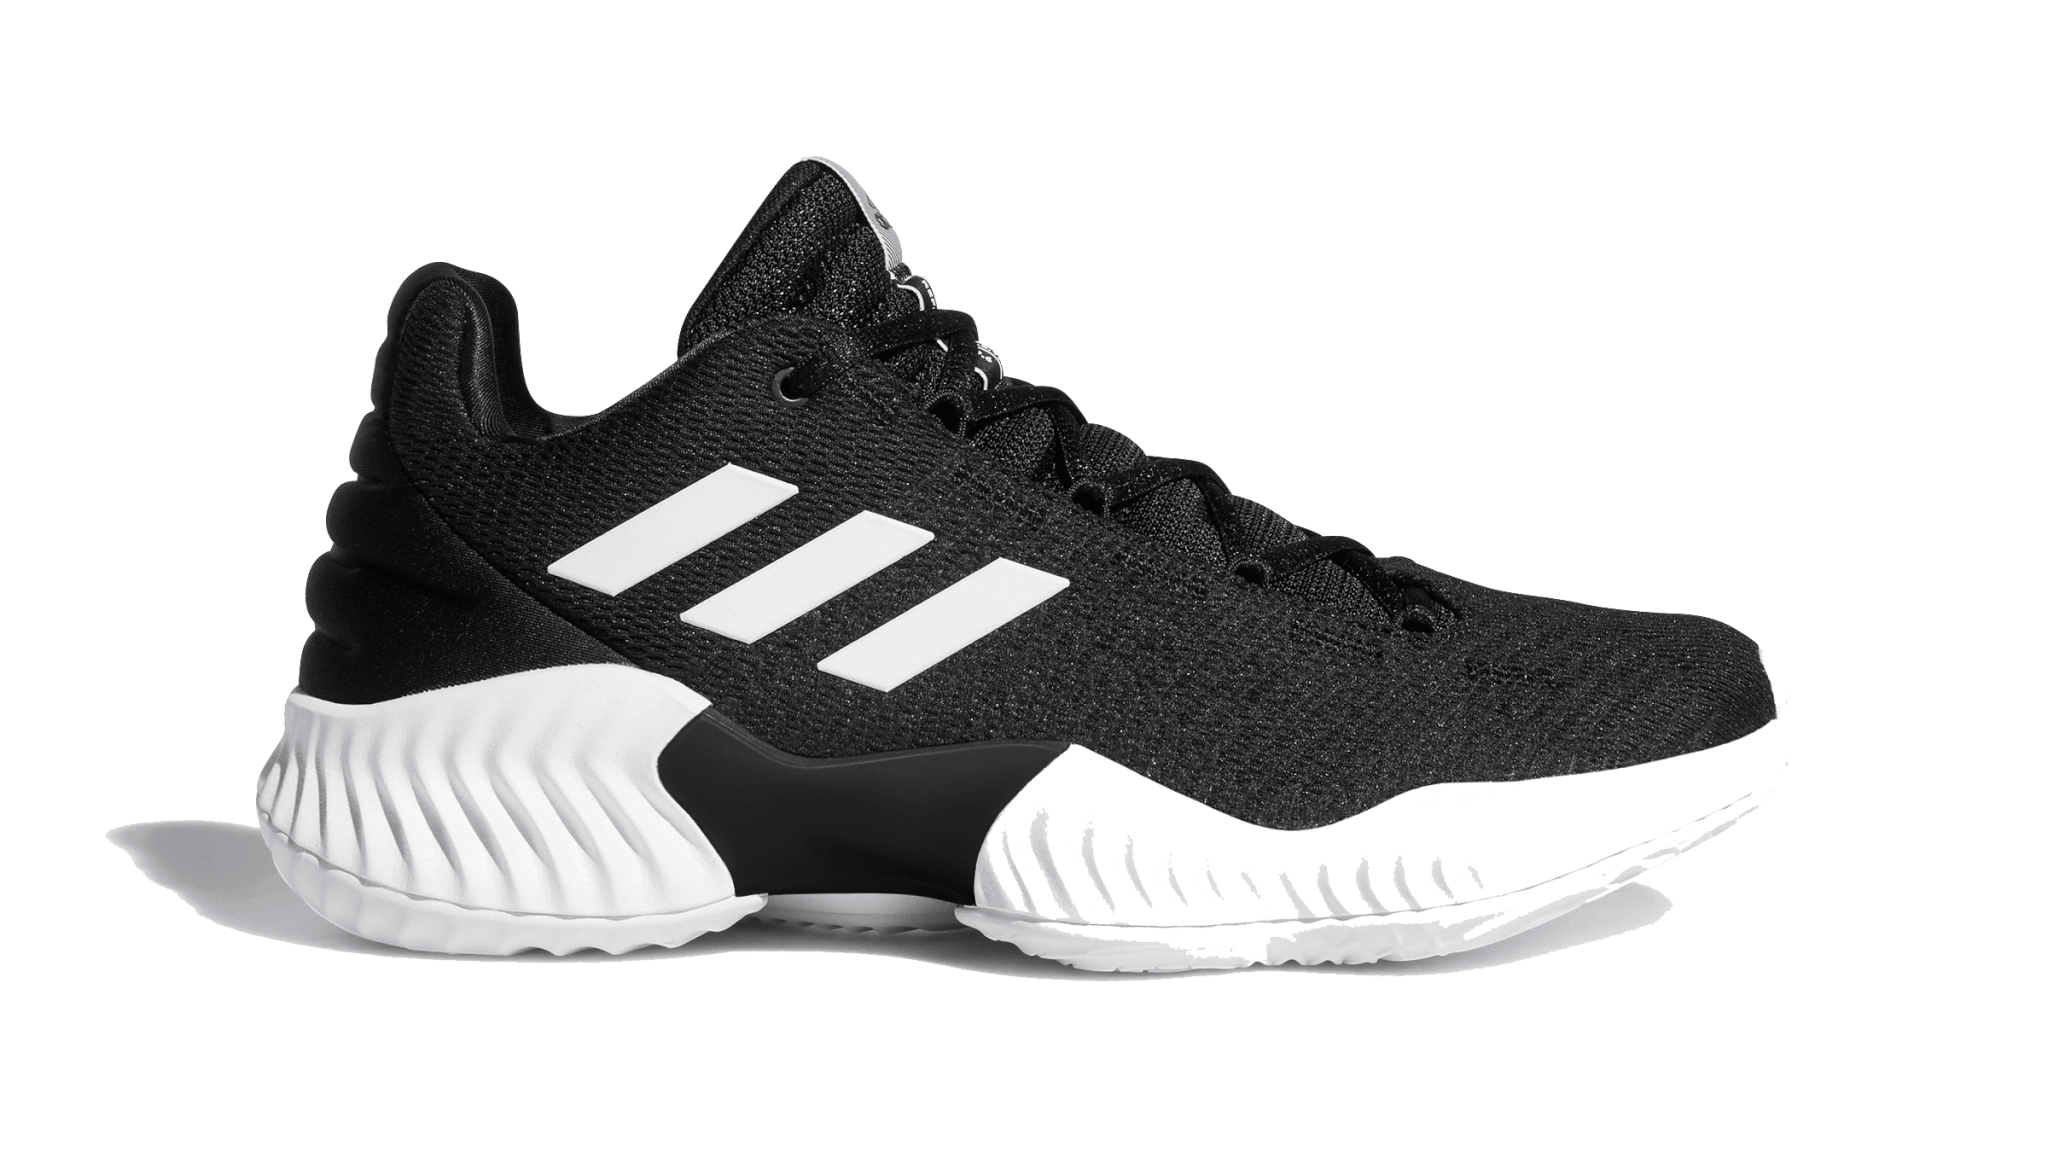 adidas pro bounce 2017 off 58% - www.intolegalworld.com